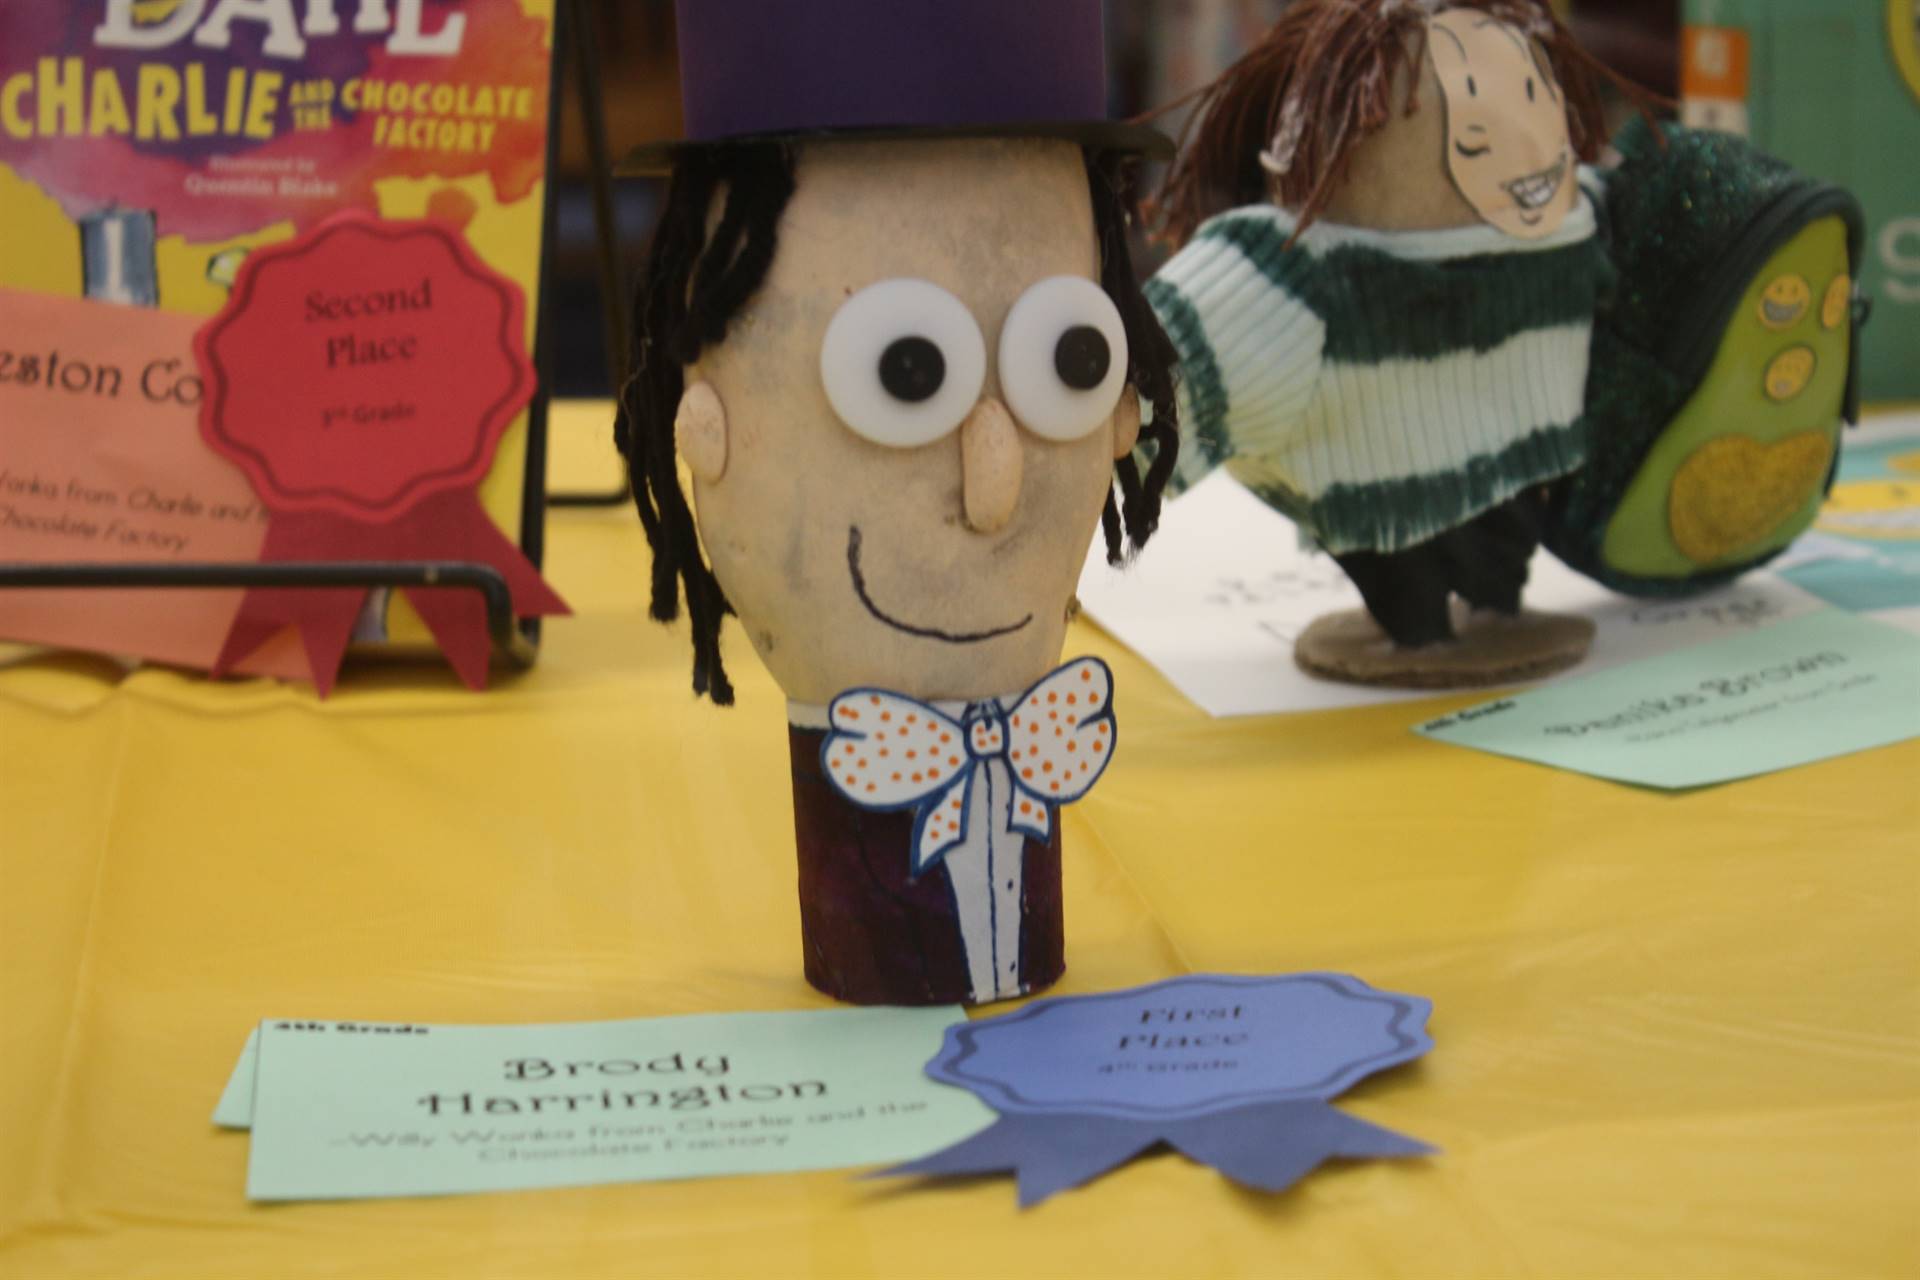 1st Place: Willy Wonka by Brody Harrington